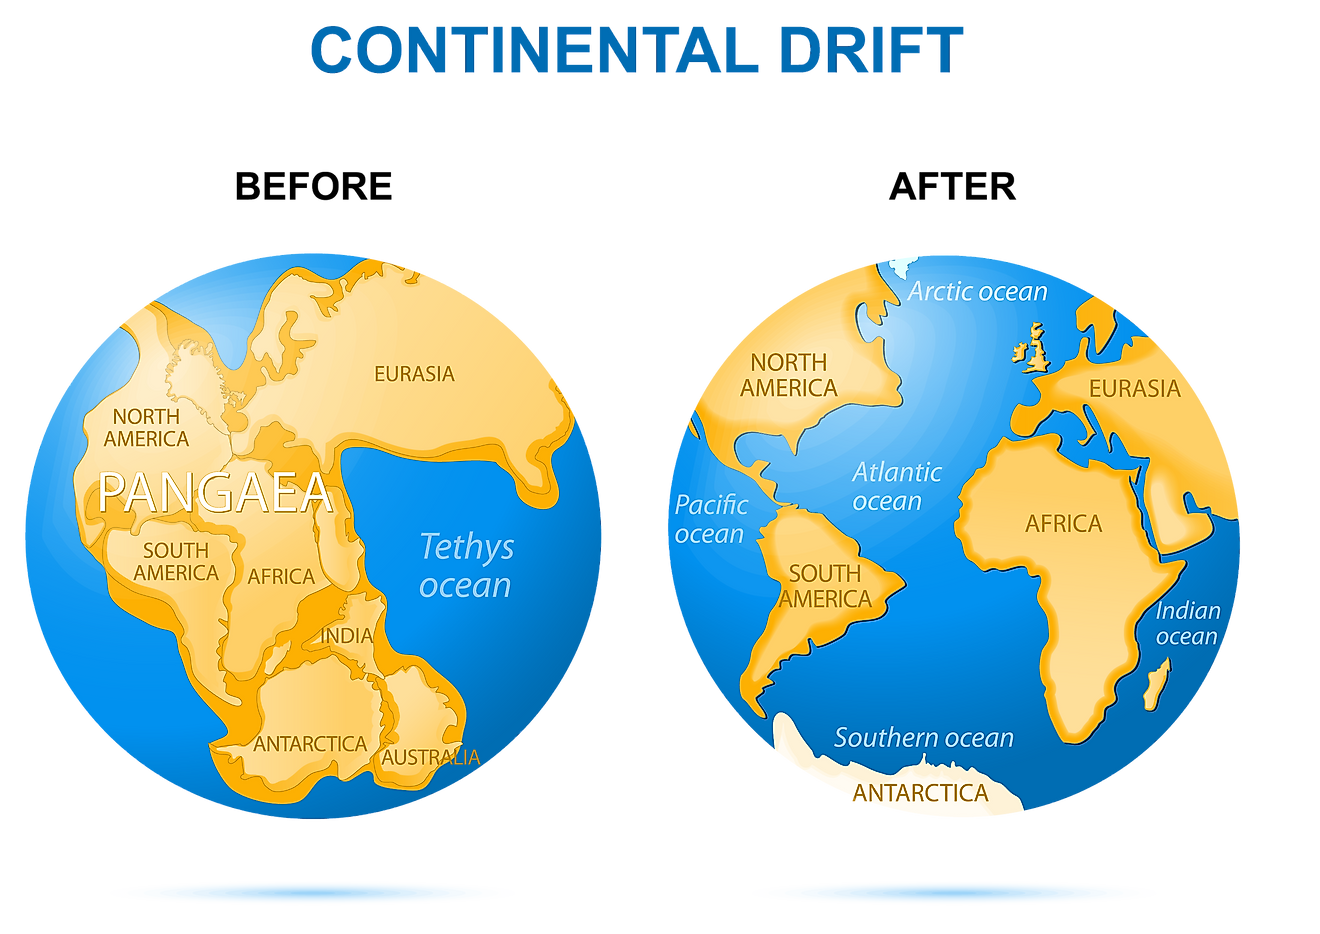 Continental drift on the planet Earth. Before as Pangaea - 200 million years ago and after as modern continents. Image credit: Designua/Shutterstock.com